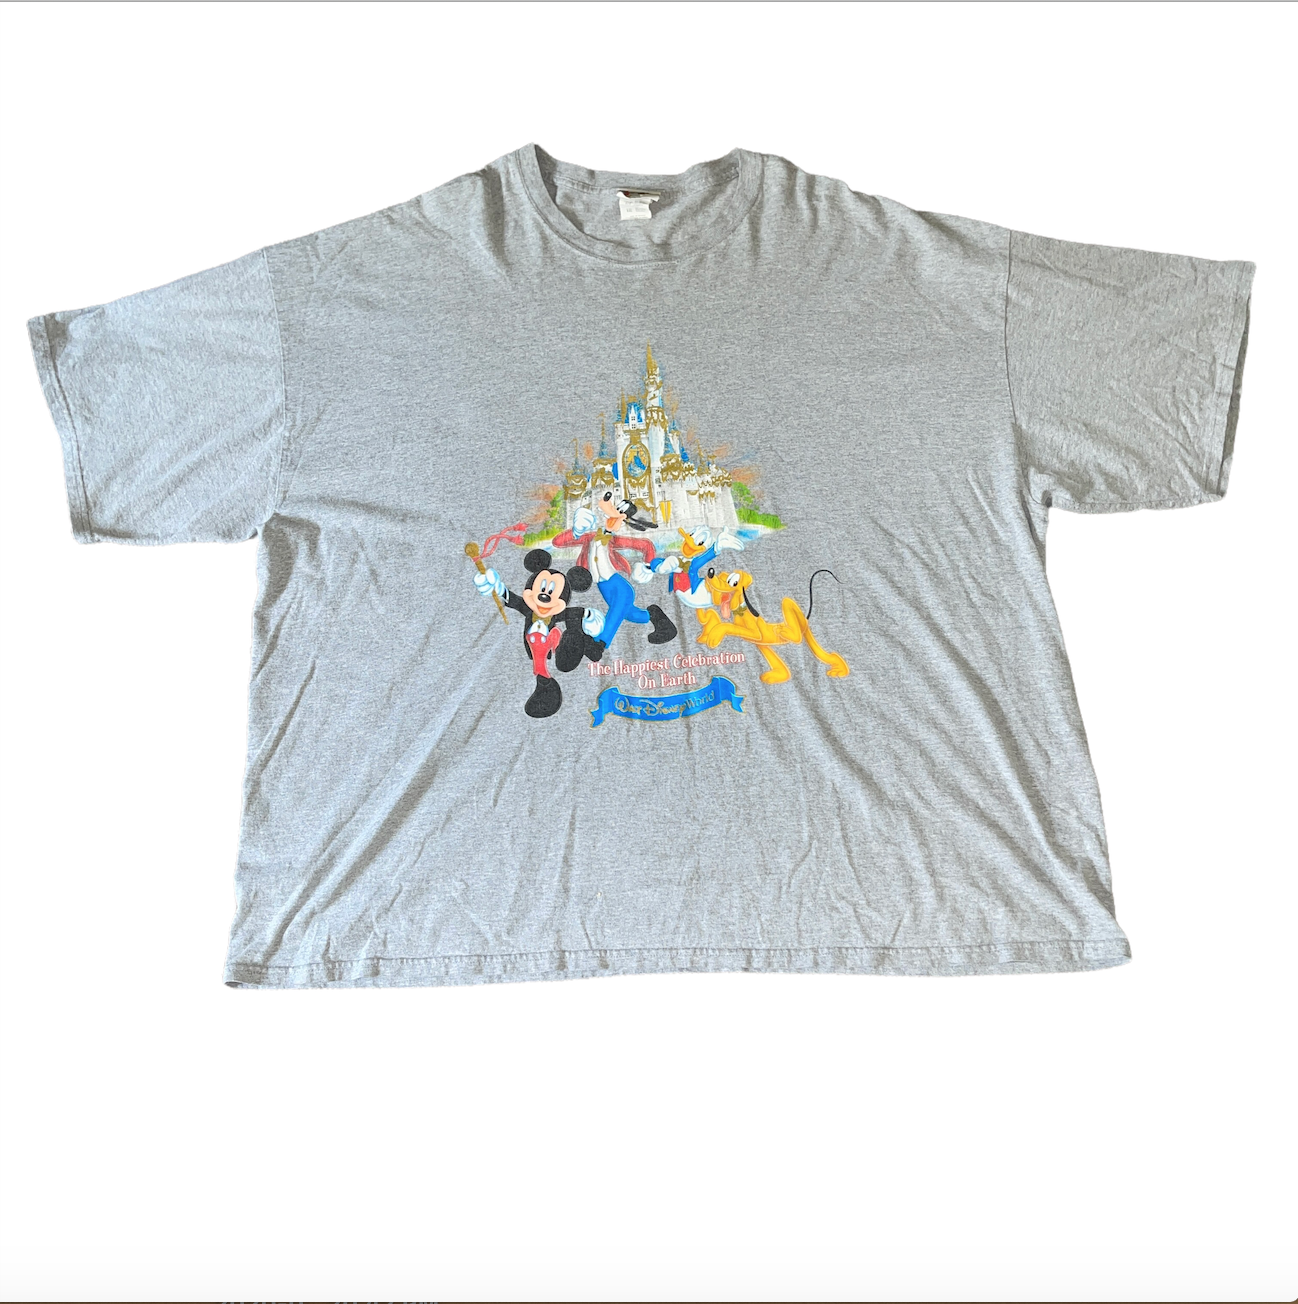 Primary image for Walt Disney World Mickey Mouse Gray Graphic T-Shirt Size 5XL Big & Tall